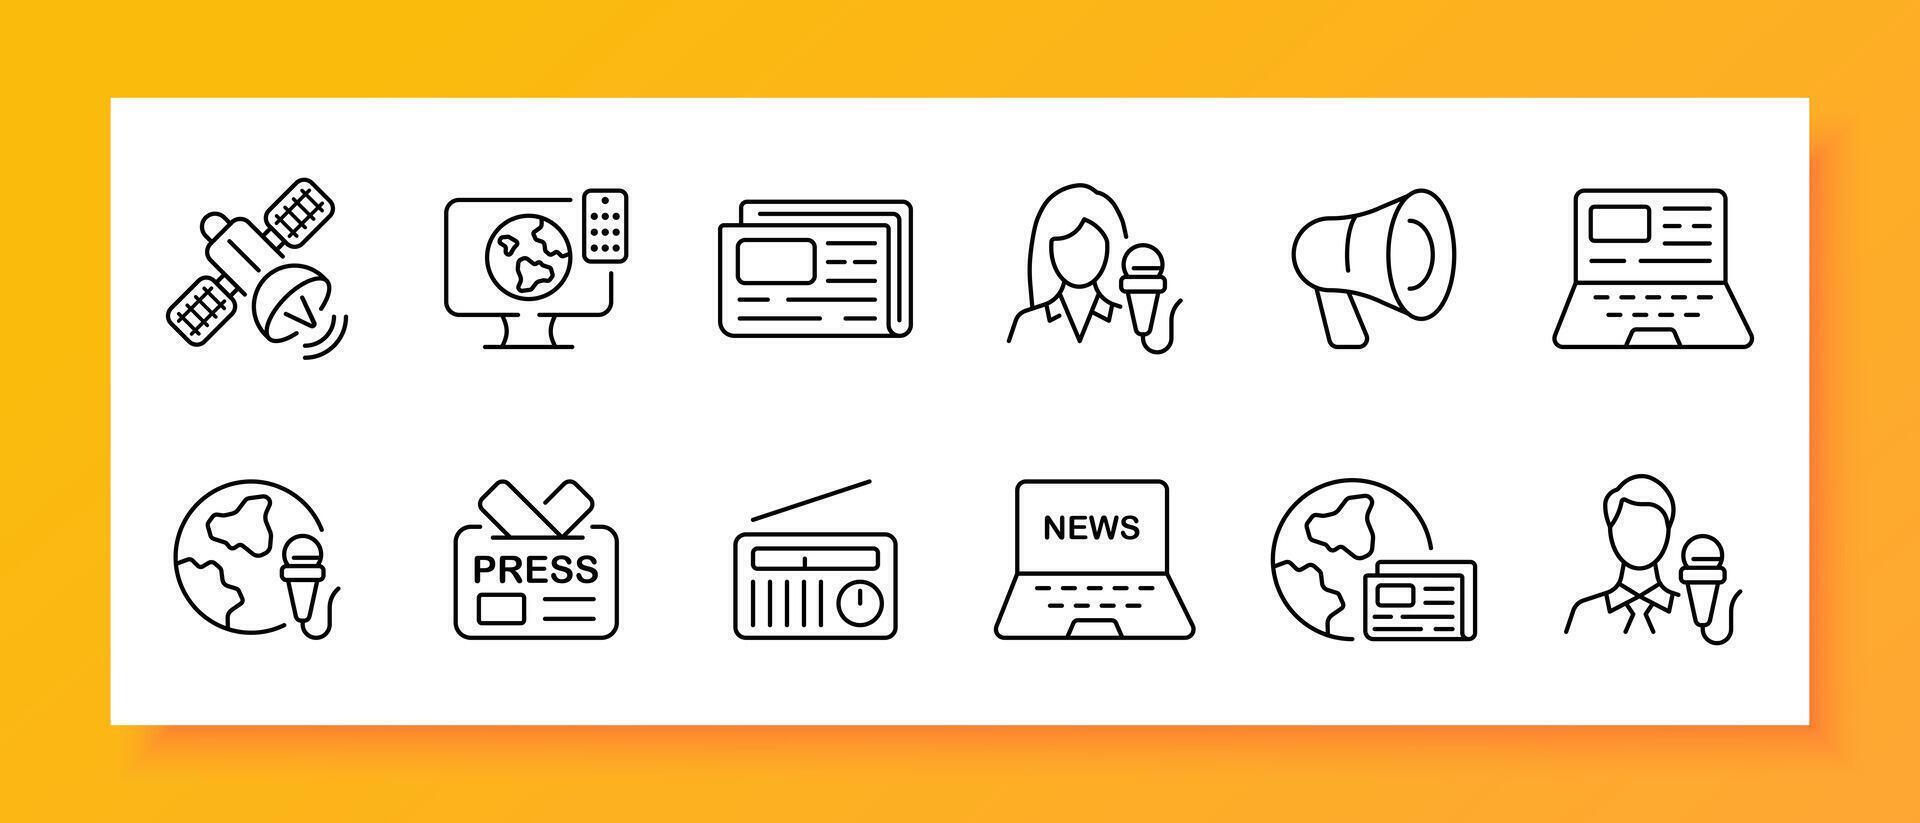 News icon set. Satellite, reporter, loudspeaker, laptop, press, newspaper, radio. Black icon on a white background. Vector line icon for business and advertising